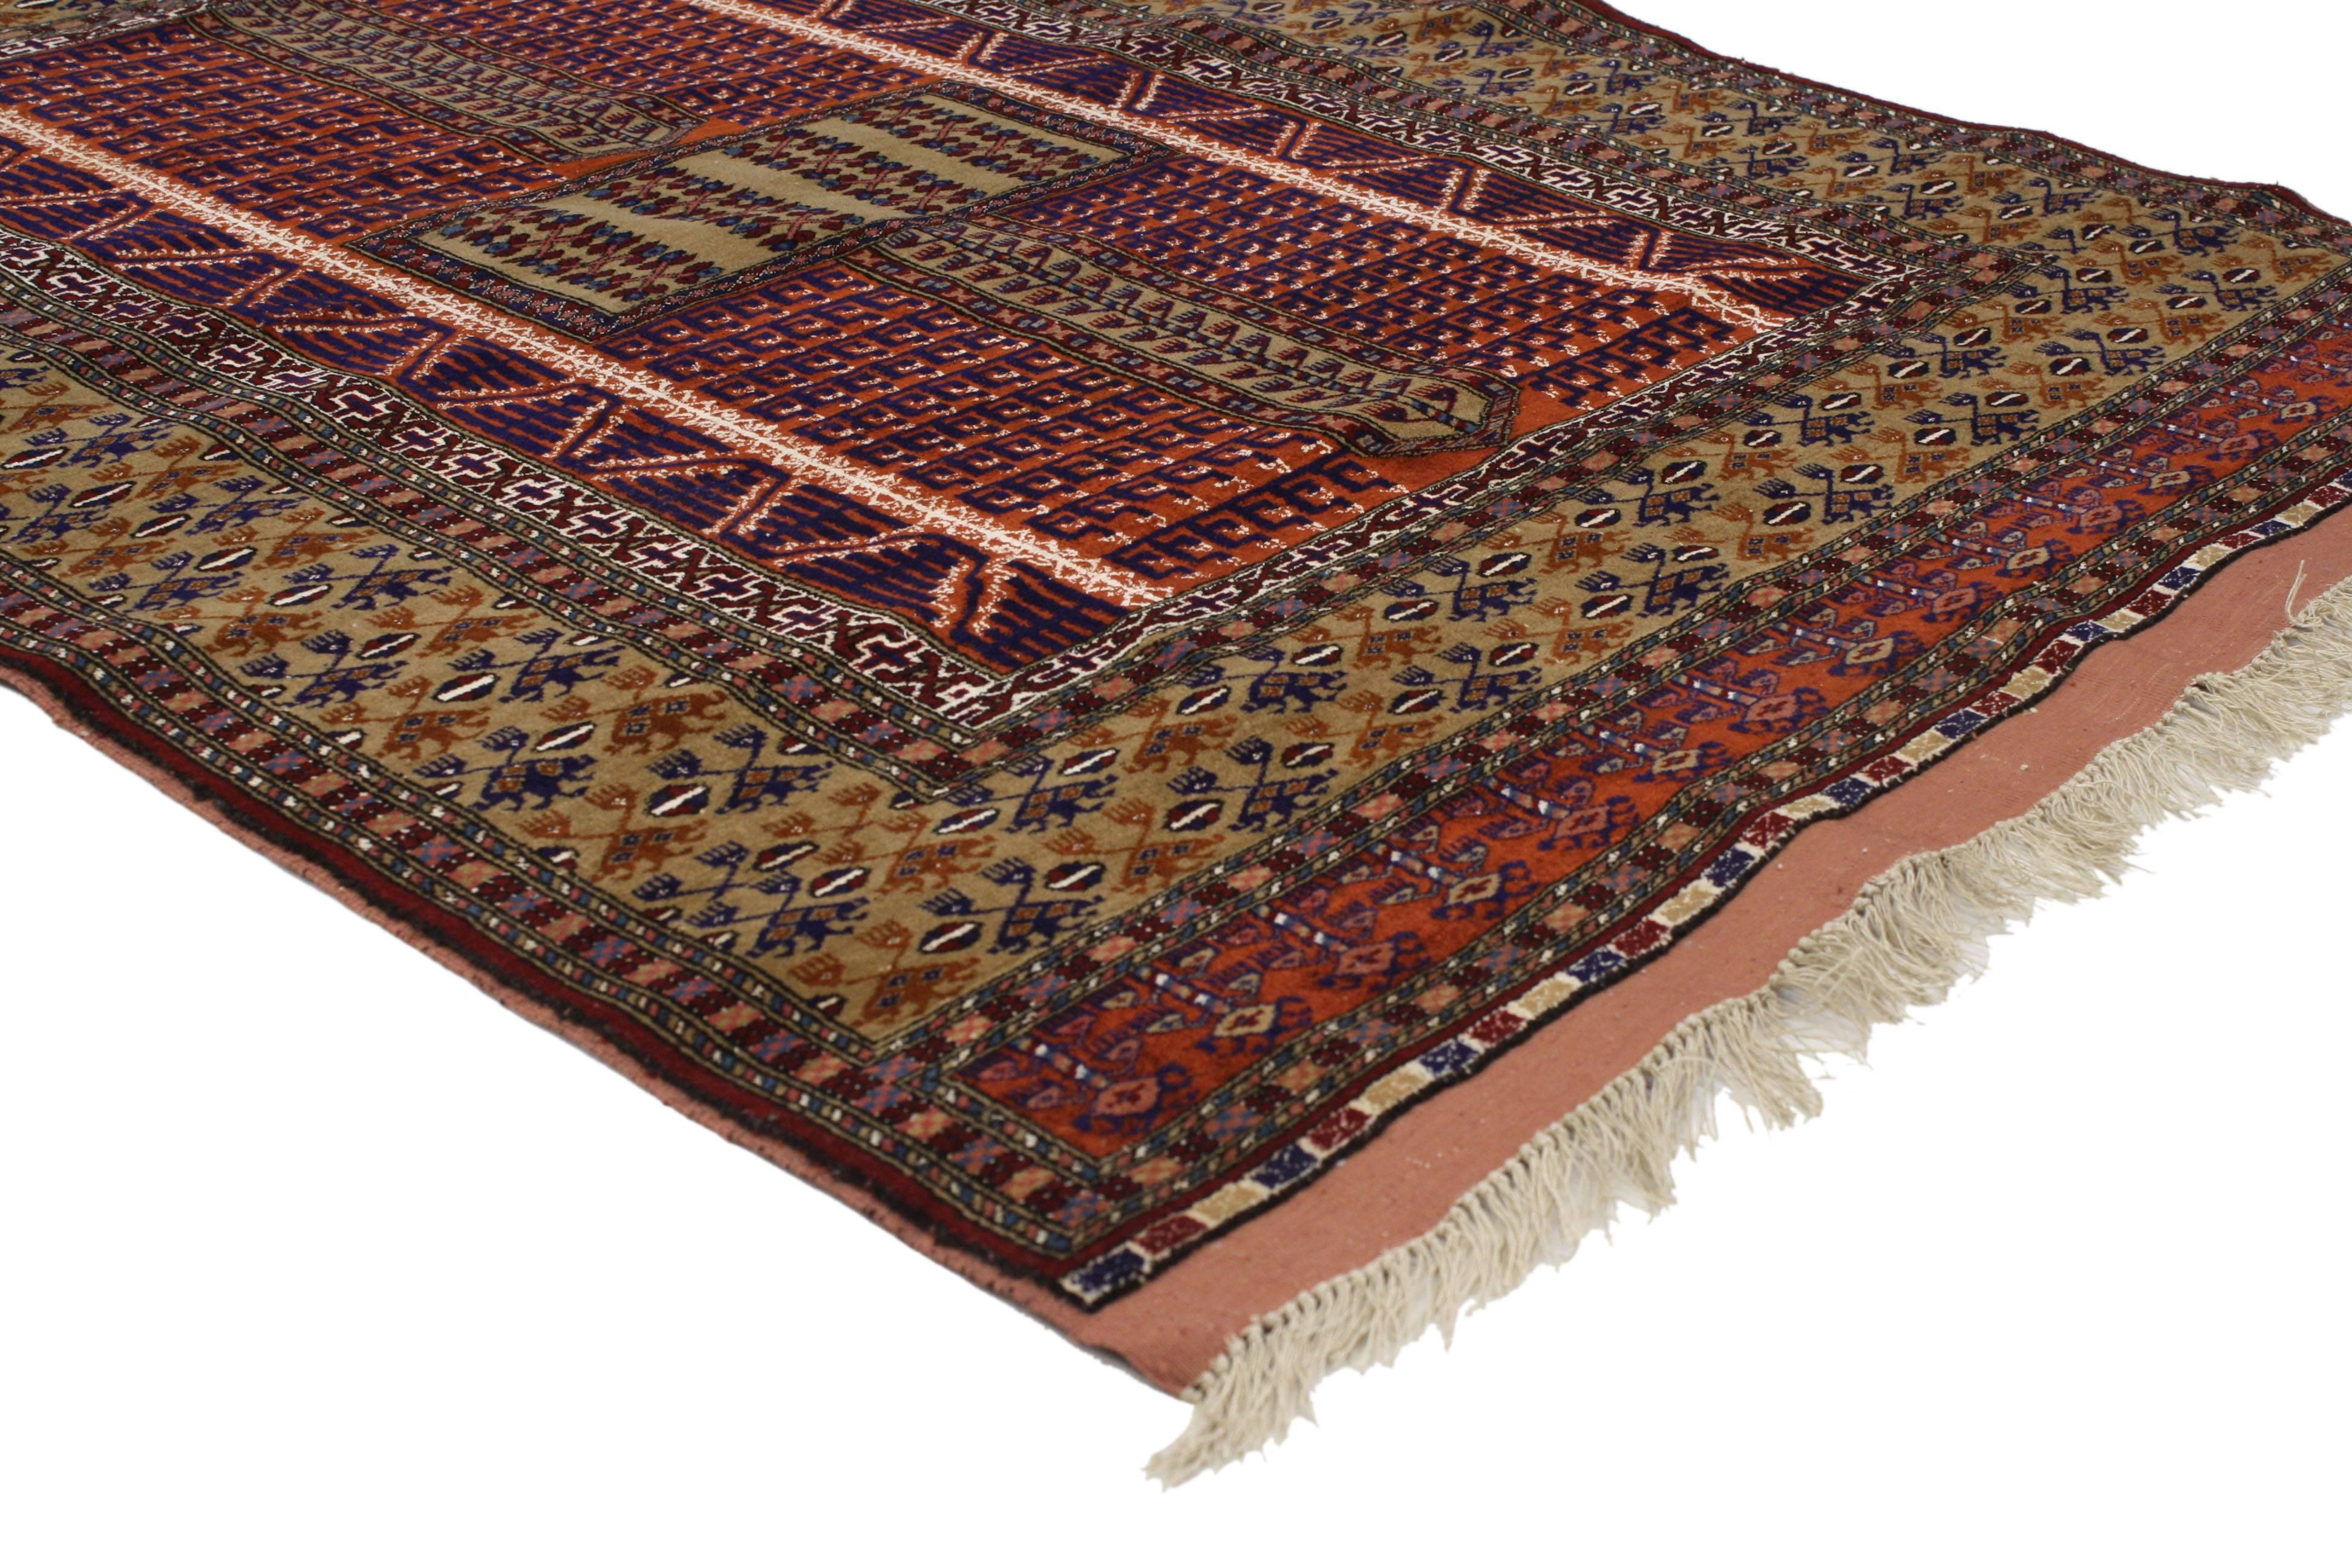 76995 Vintage Afghan Turkoman Tribal Ersari Engsi, Hatchli Tent Door Hanging Ensi. This hand knotted wool vintage Afghan Hatchli Ersari rug is also known as a Turkoman tent door Hanging aka Ensi. It features a compartmental design composed of an